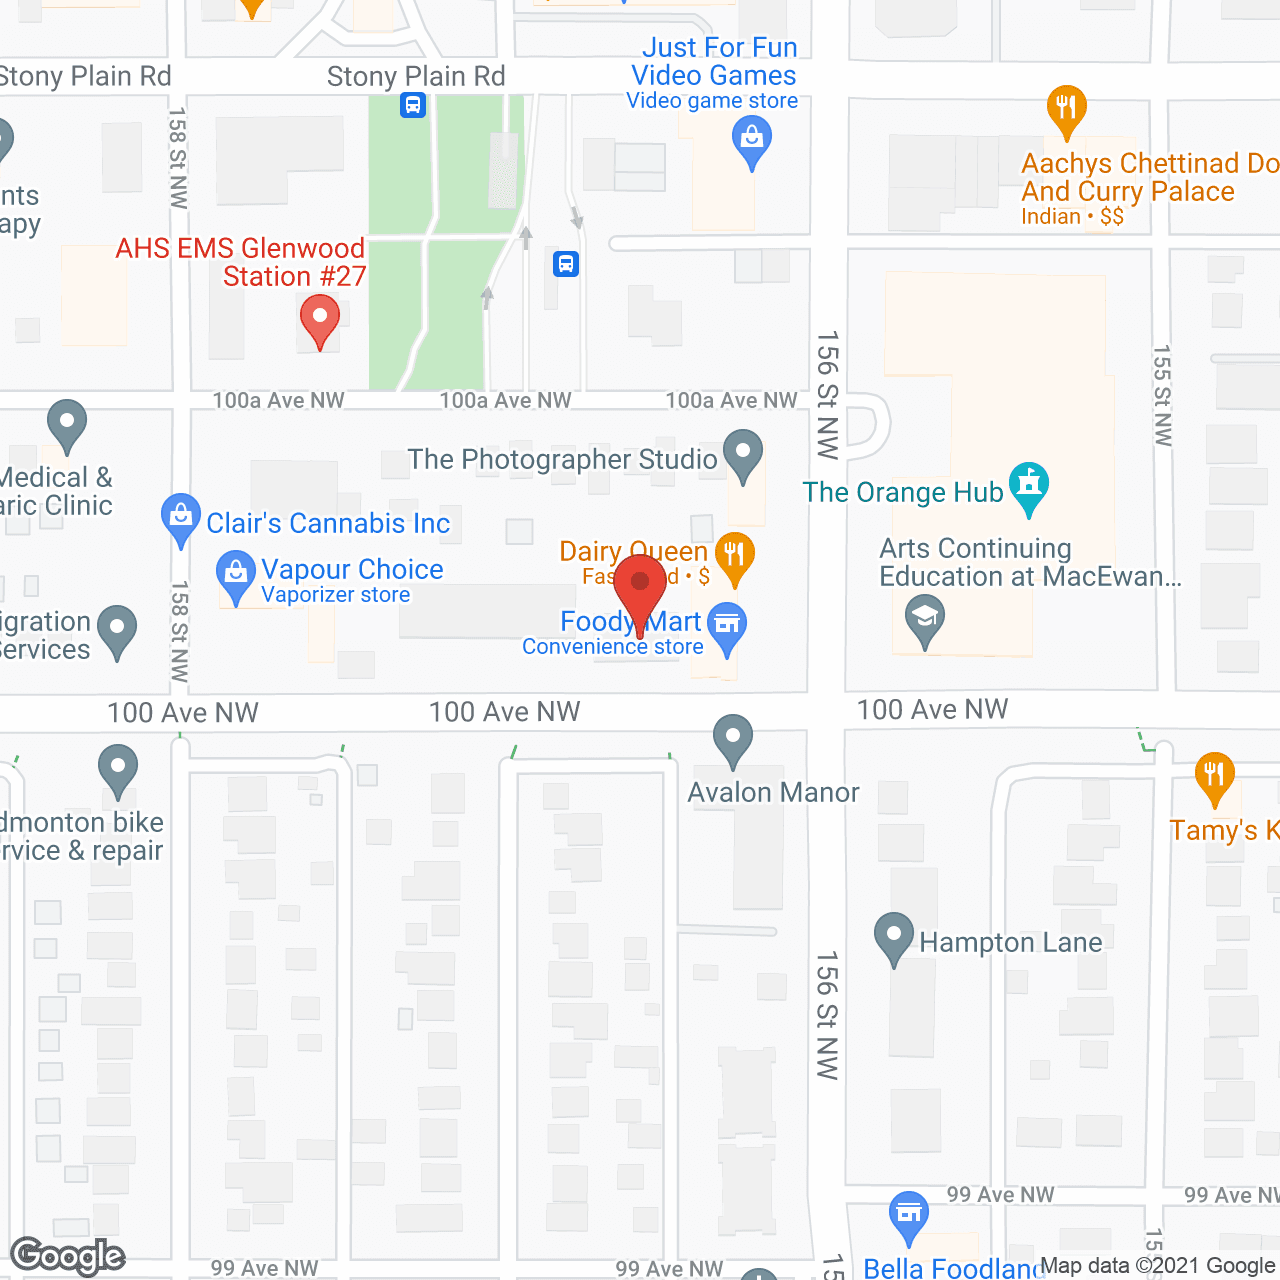 The Madison in google map